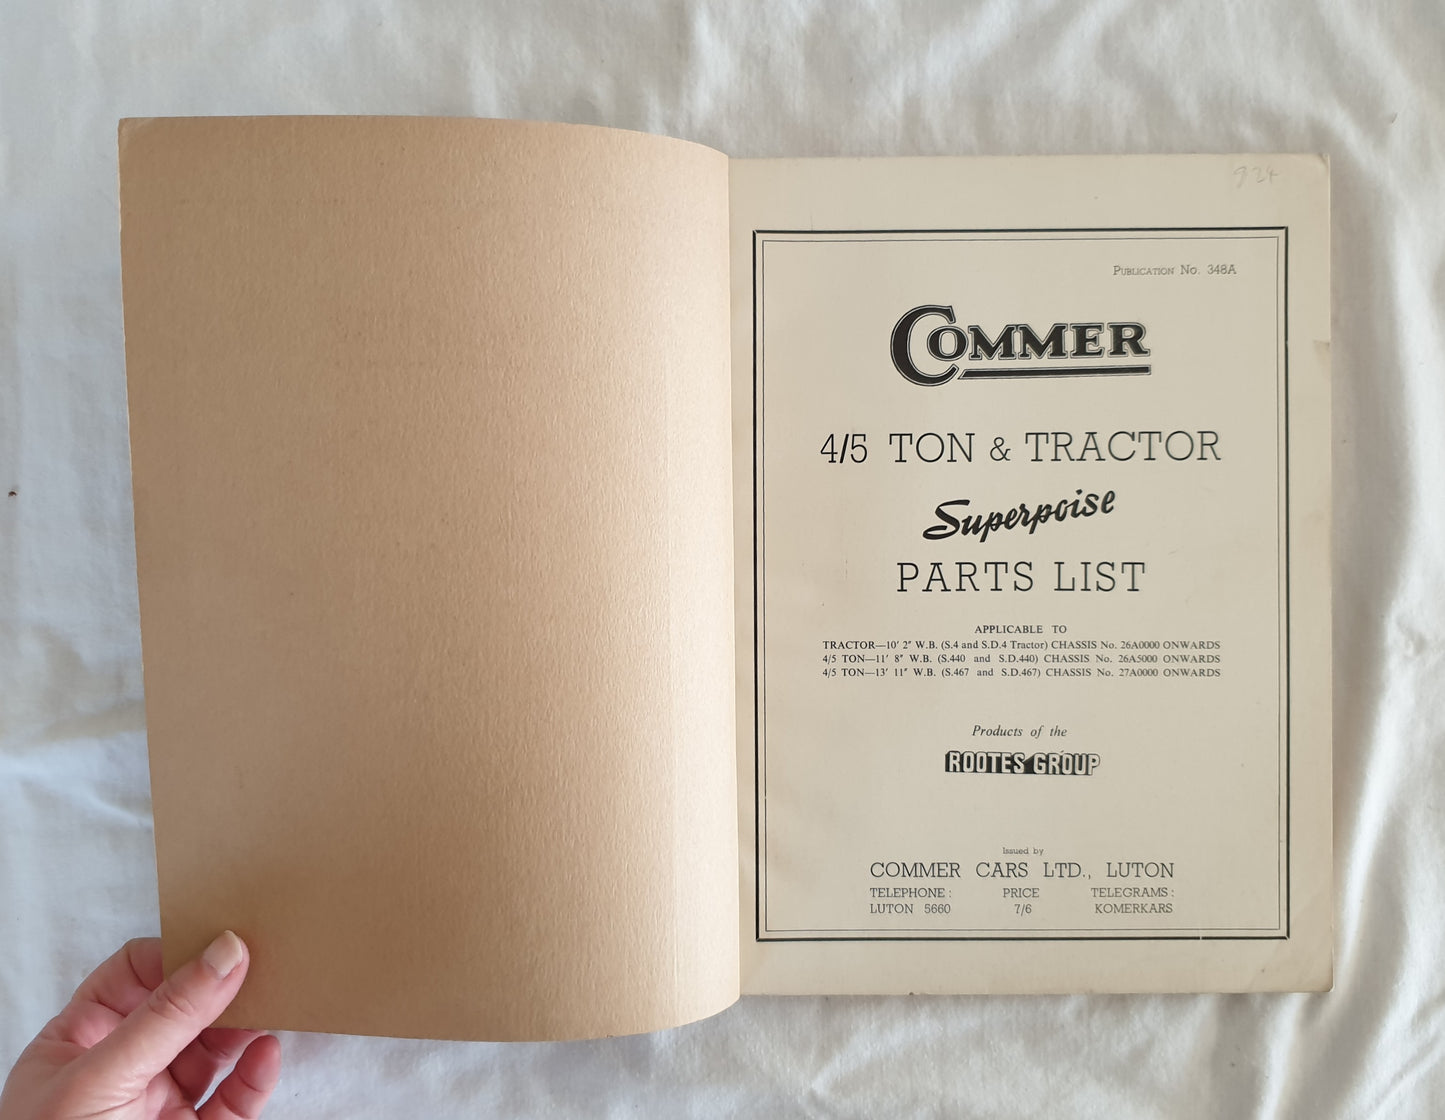 Commer 4/5 Ton & Tractor Superpoise Parts List